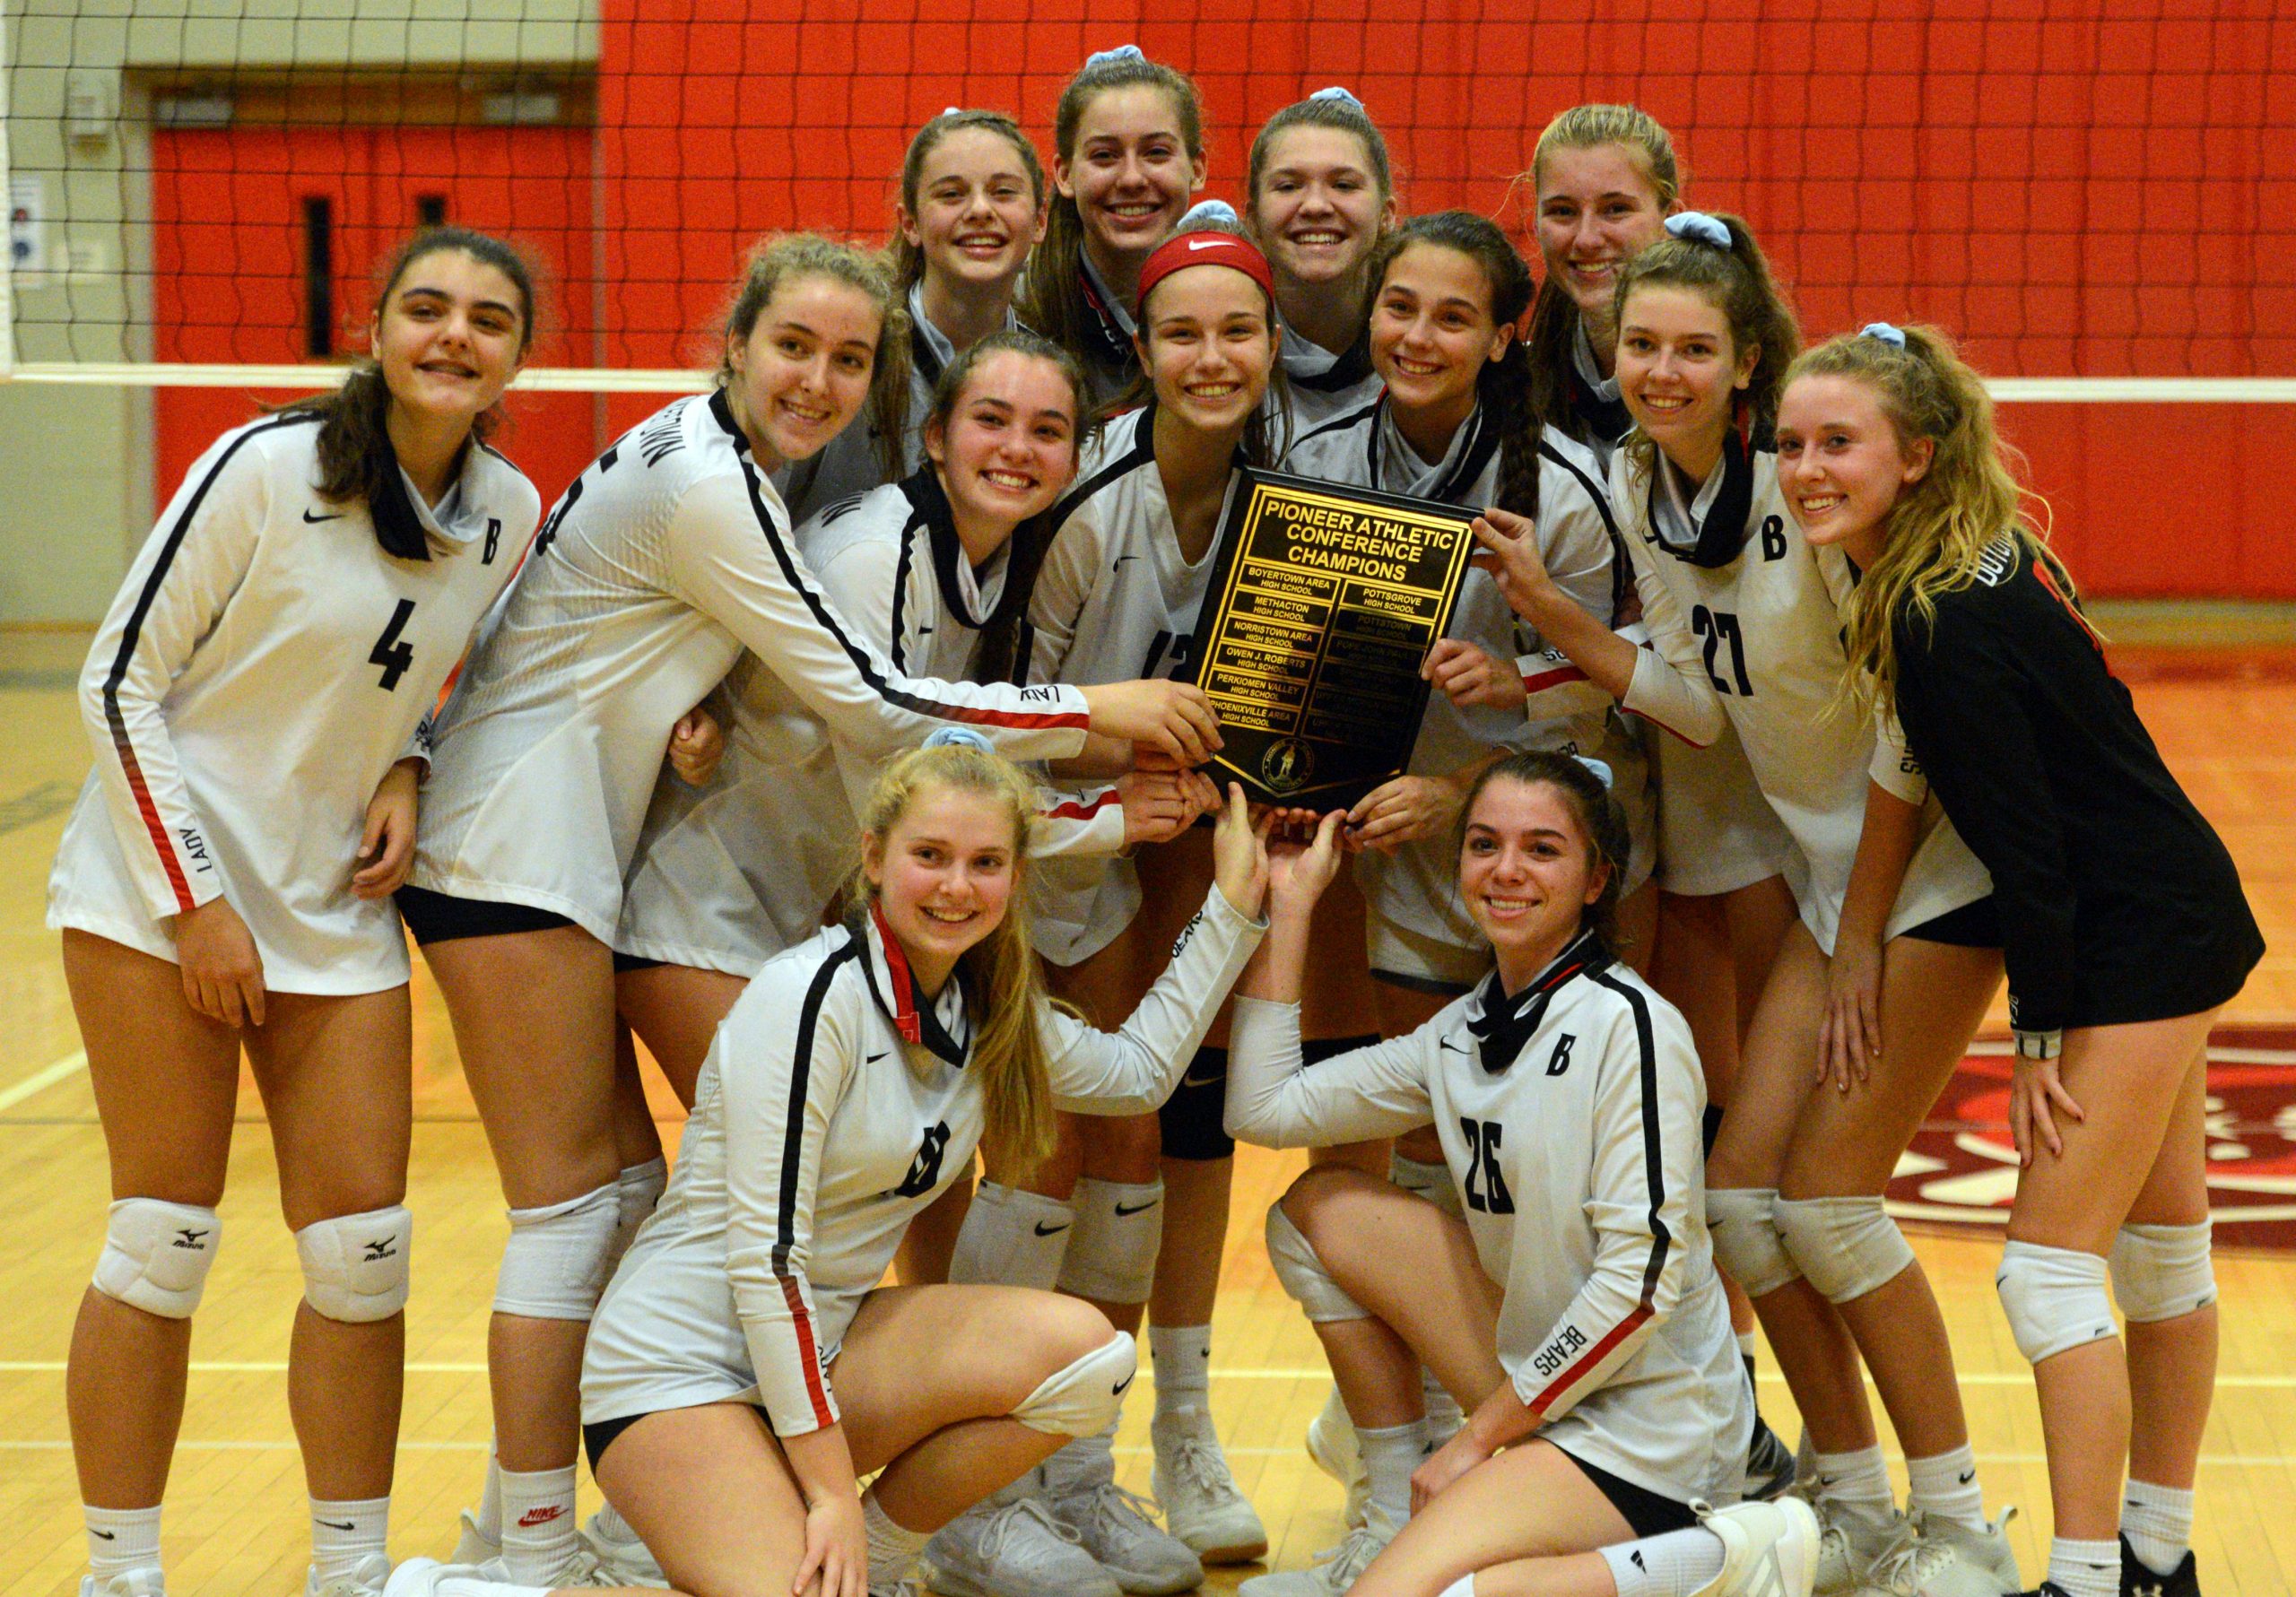 Boyertown knocks off Pottsgrove, clinches first PAC girls volleyball championship